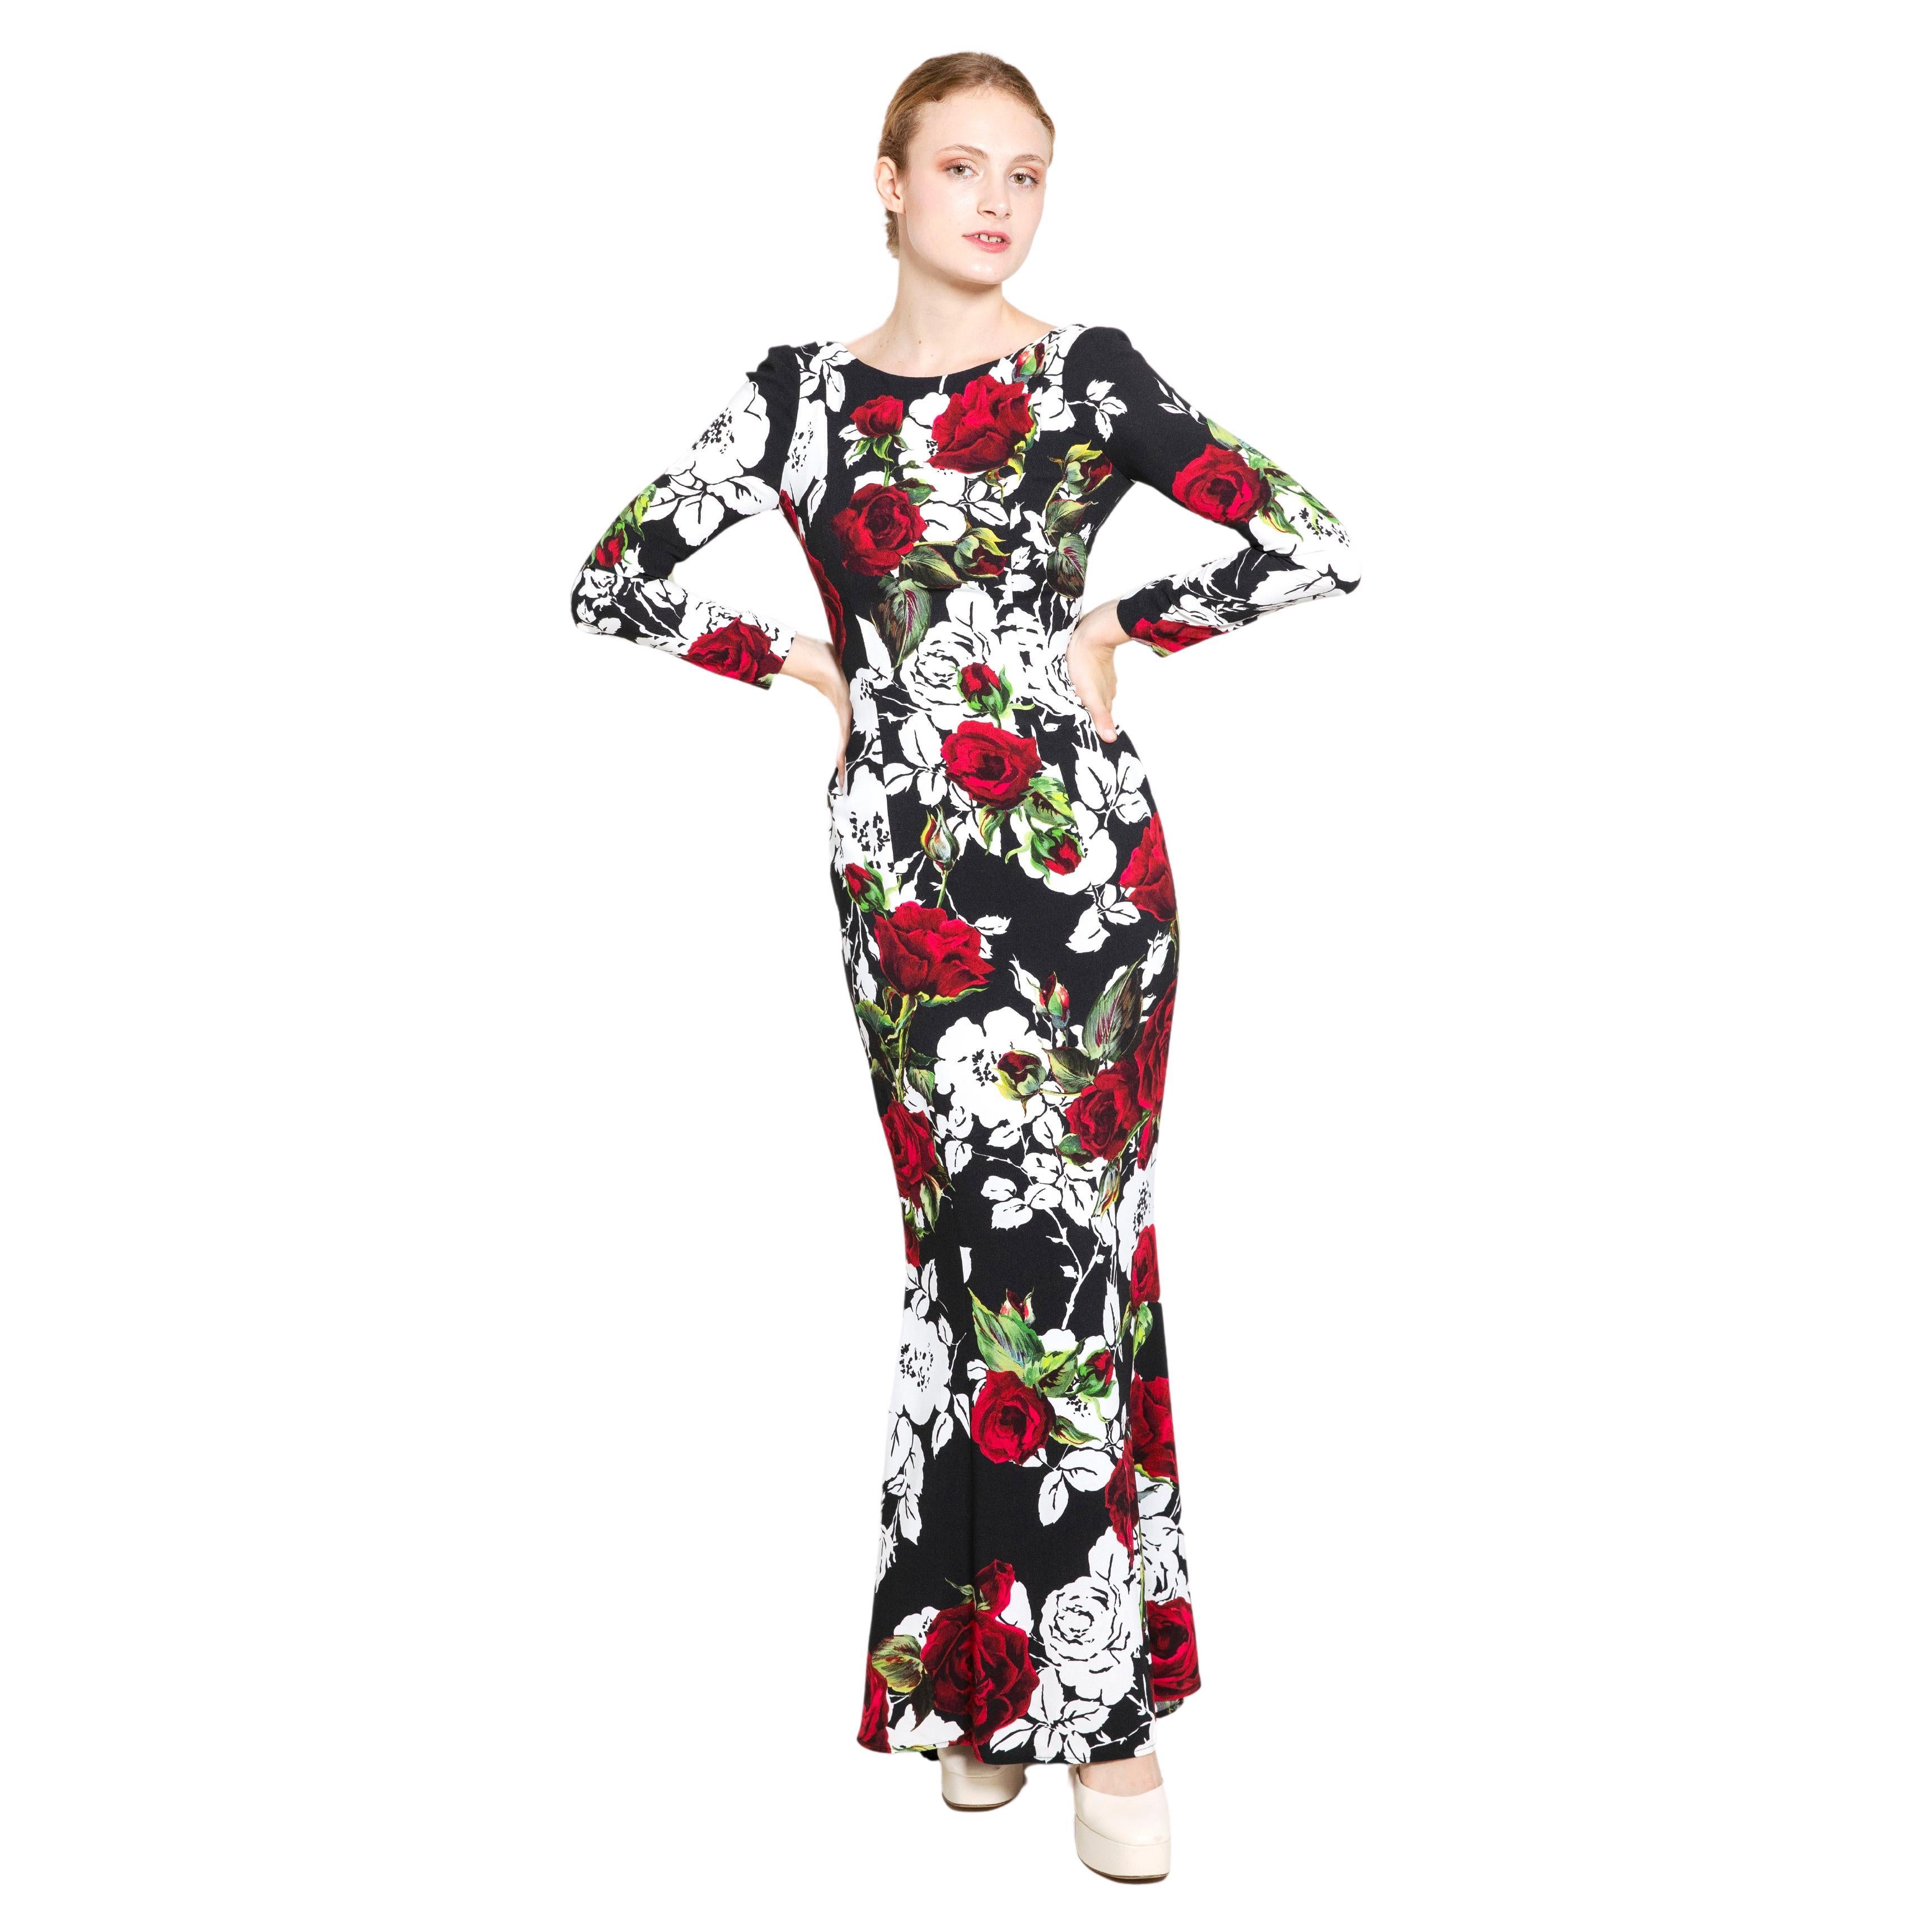 Dolce & Gabbana Fall 2015 L/S Floral Dress For Sale